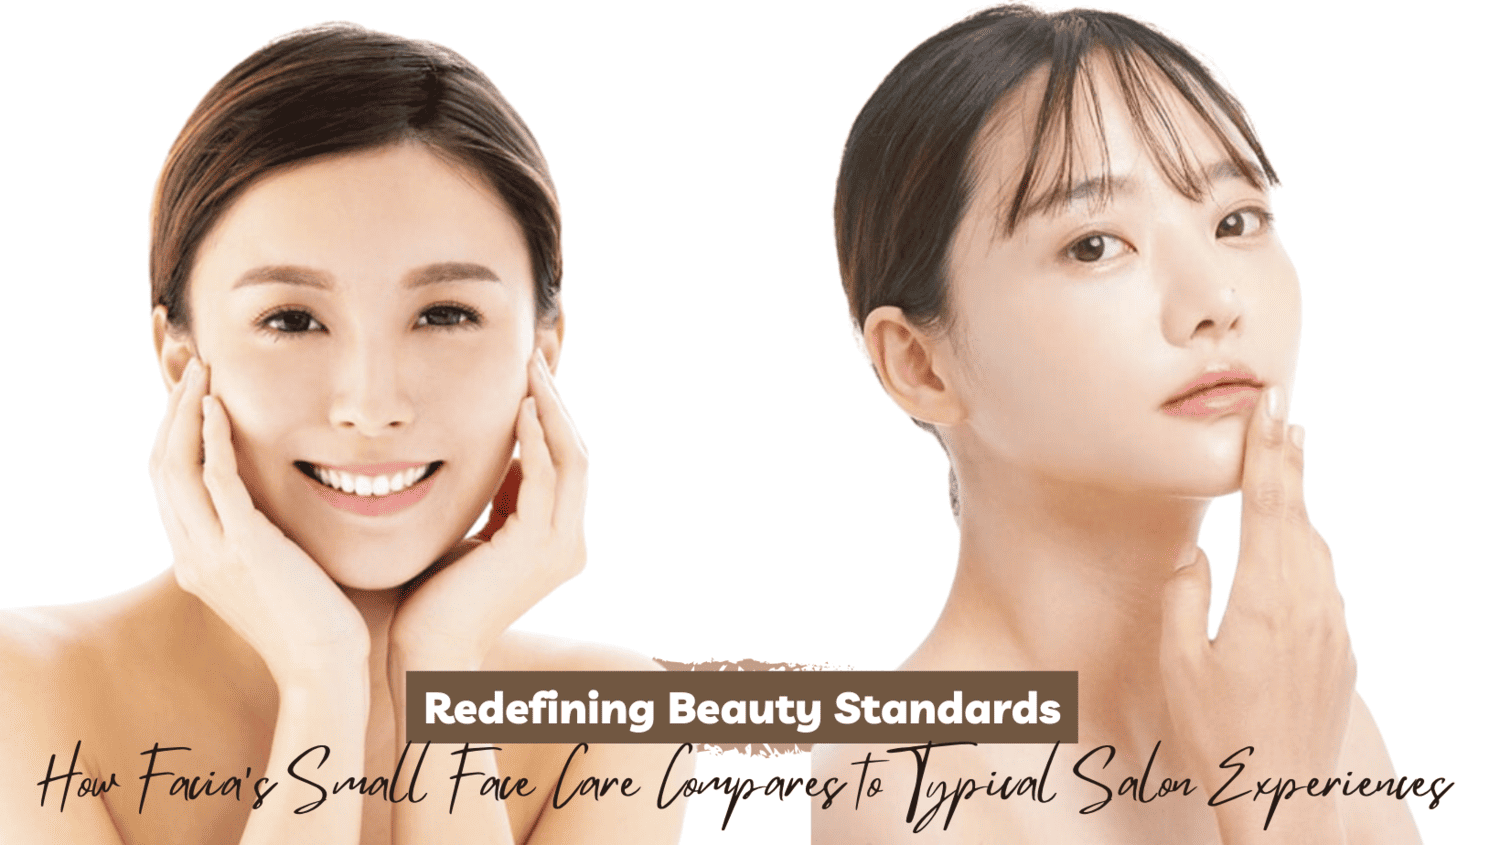 Redefining Beauty Standards: How Facia’s Small Face Care Compares to Typical Salon Experiences